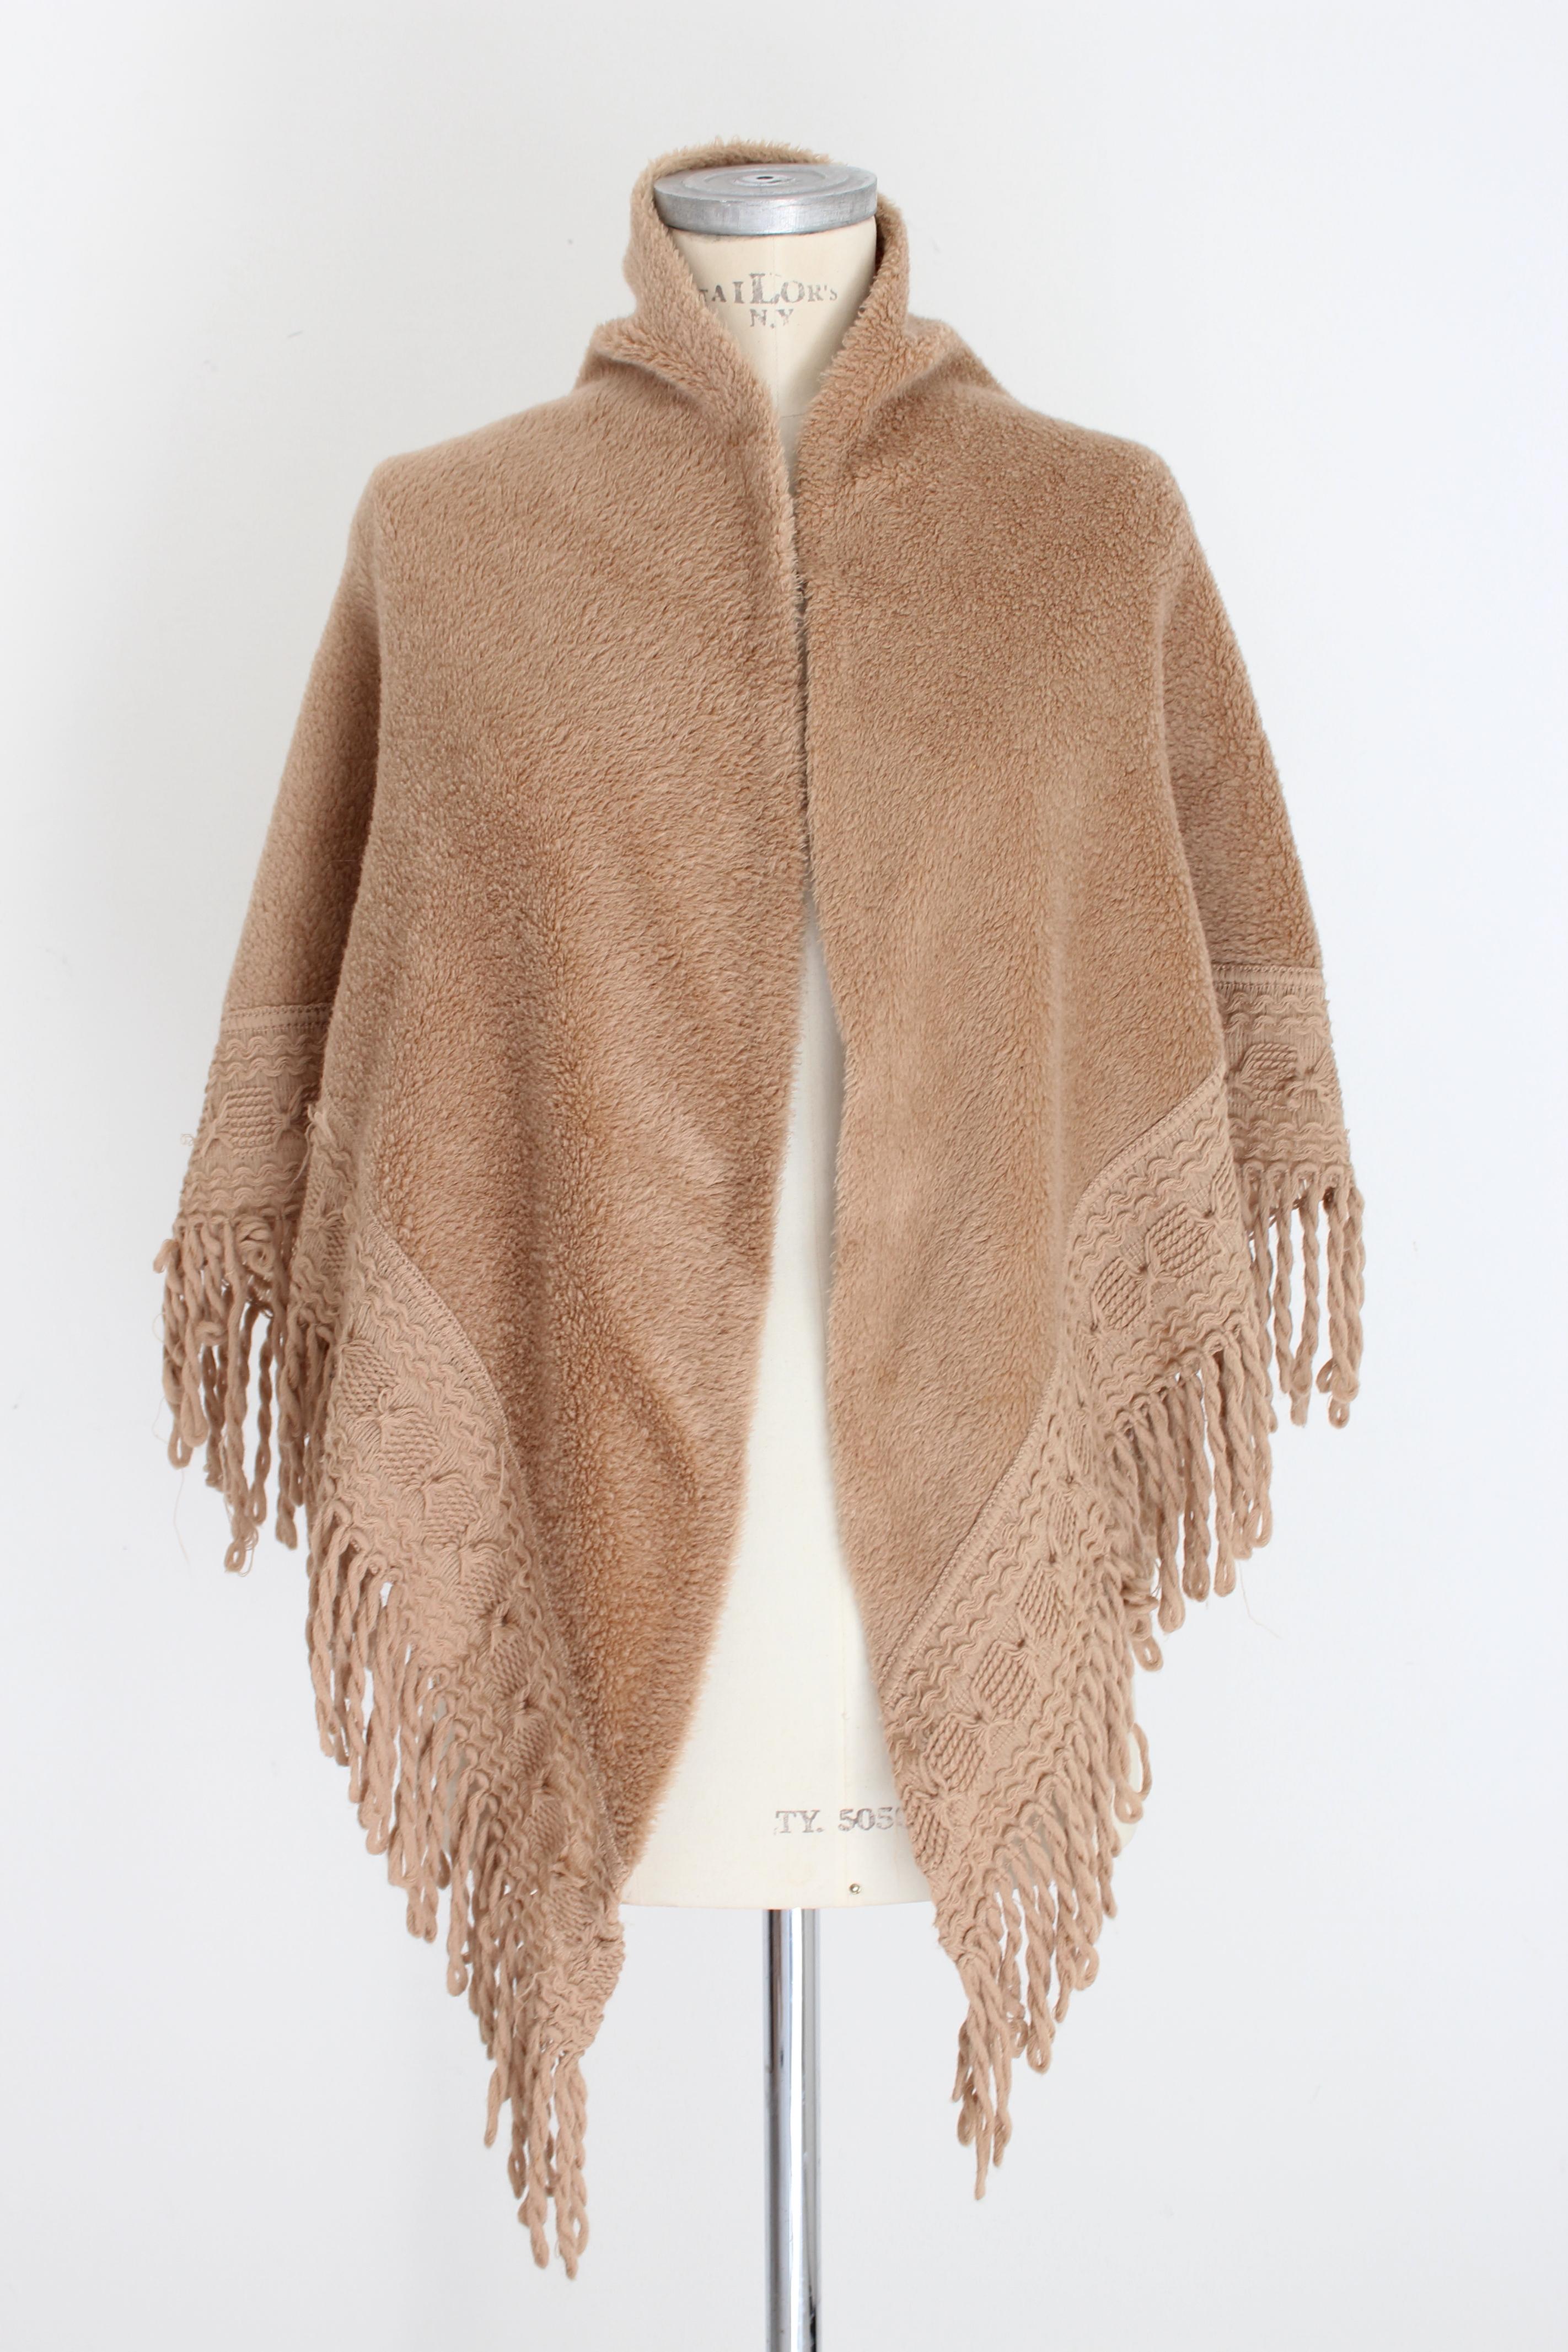 Pierre Balmain Boutique vintage cape 80s. Large wraparound stole, beige color with fringes. 100% wool fabric. Made in France.

Condition: Excellent

Item used few times, it remains in its excellent condition. There are no visible signs of